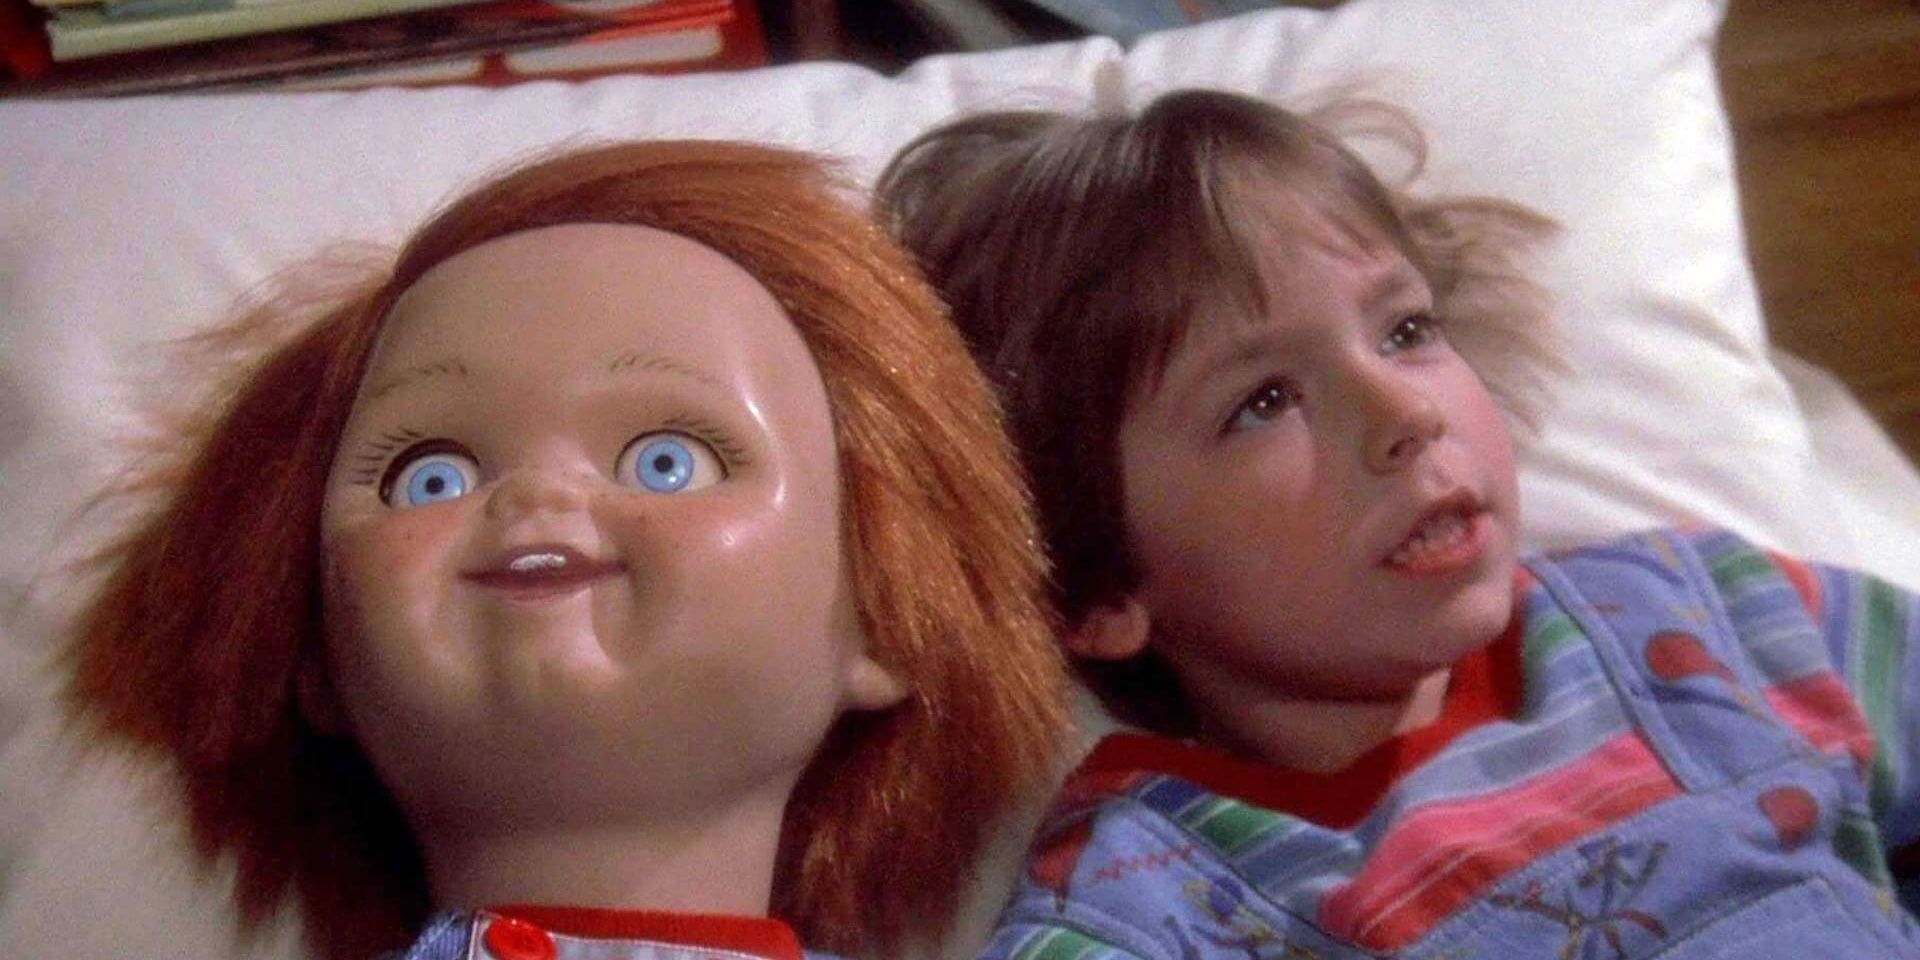 Chucky laying next to Andy in Child's Play